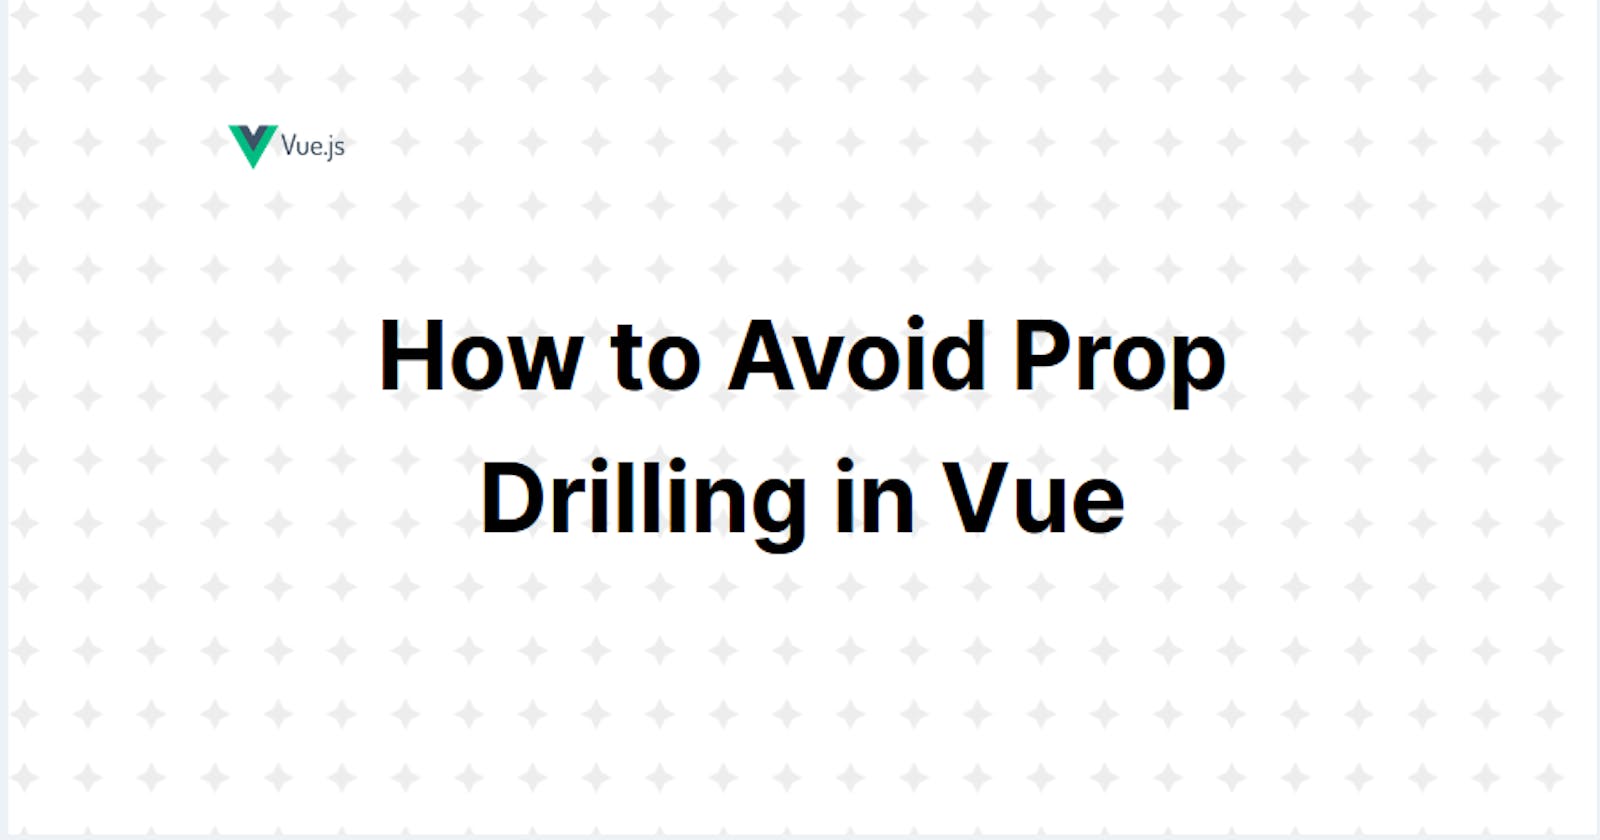 How to Avoid Prop Drilling in Vue